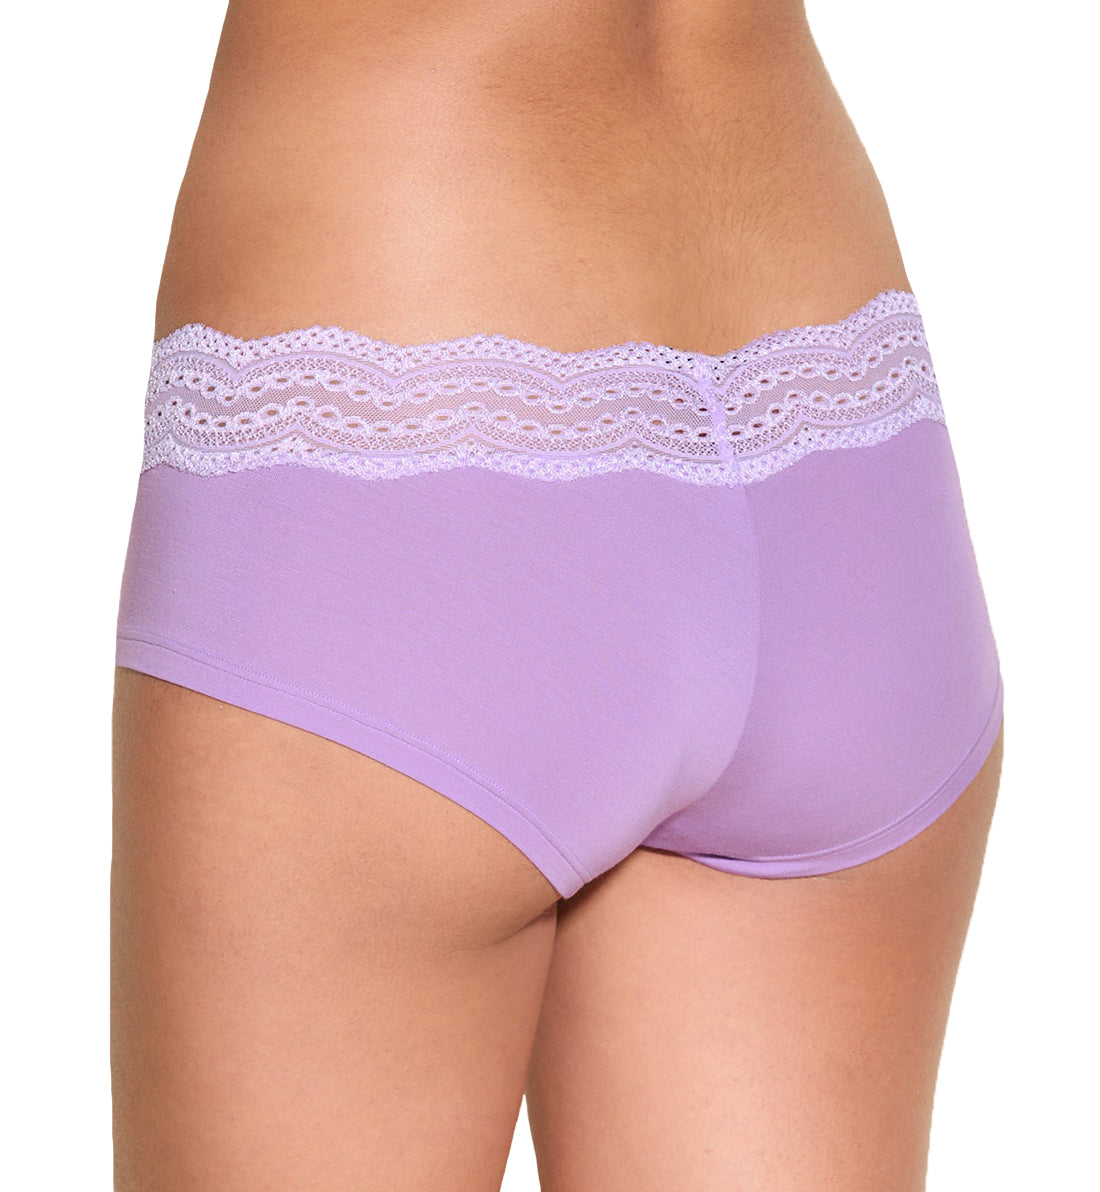 Cosabella Ceylon Modal Low Rise Hotpant (CEYMD0721),Small,Icy Violet - Icy Violet,Small